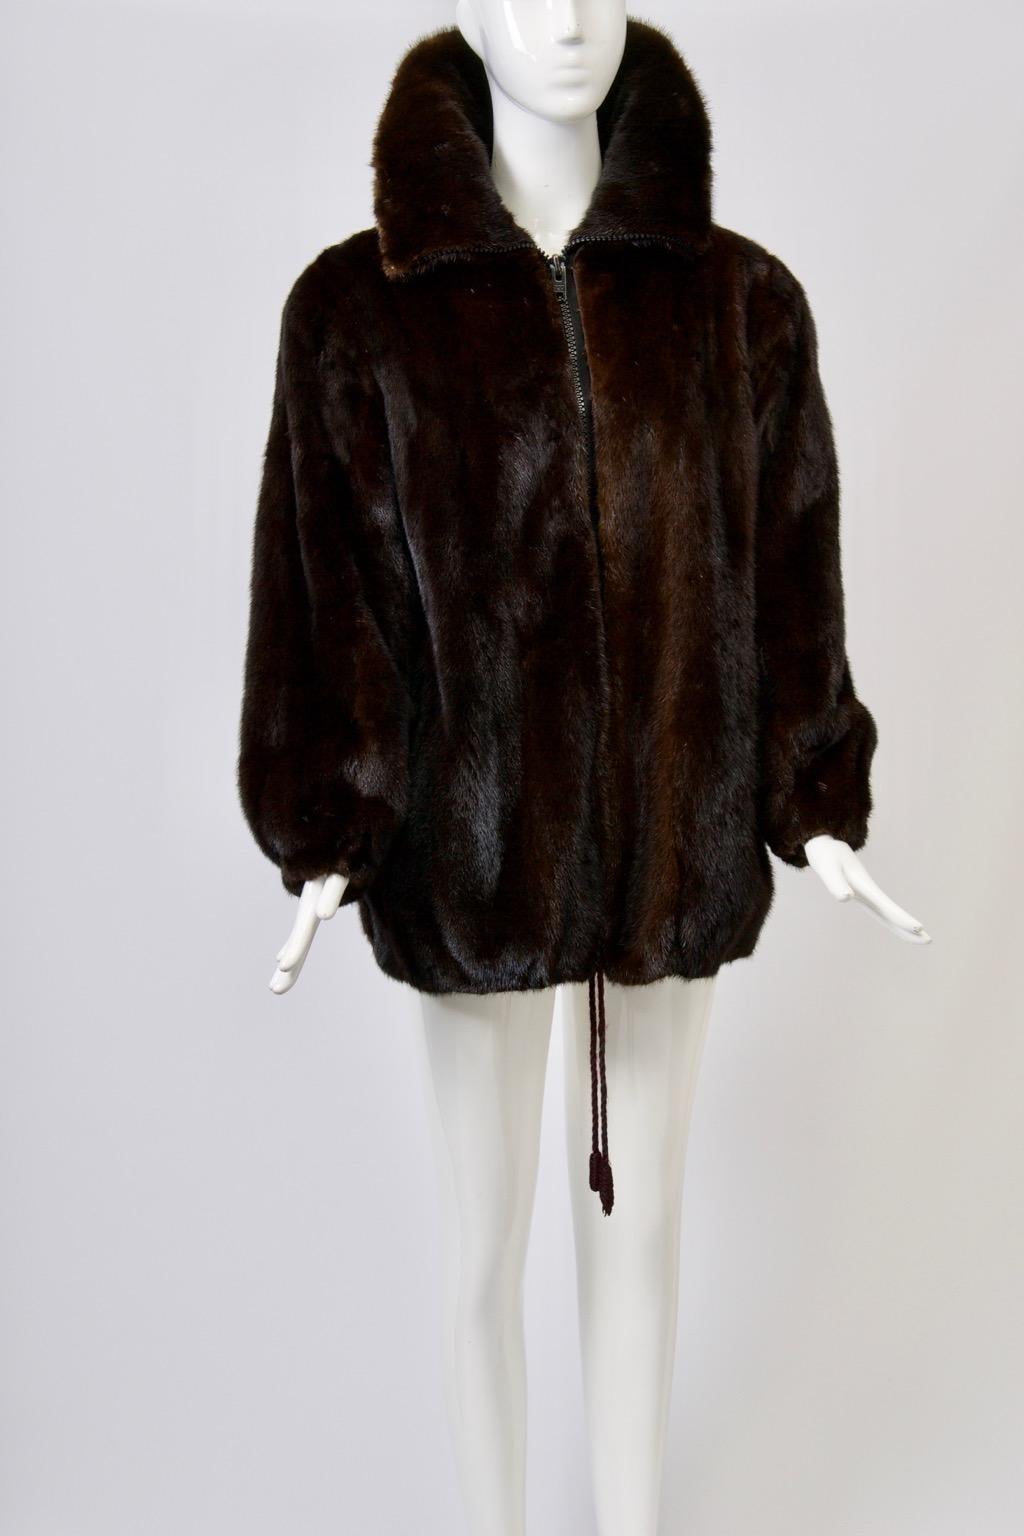 Dark mink hip-length jacket featuring a zippered closure and drawstring hem. The attractive large collar can be worn open or rolled over and fastened for further warmth. Approximate size M.